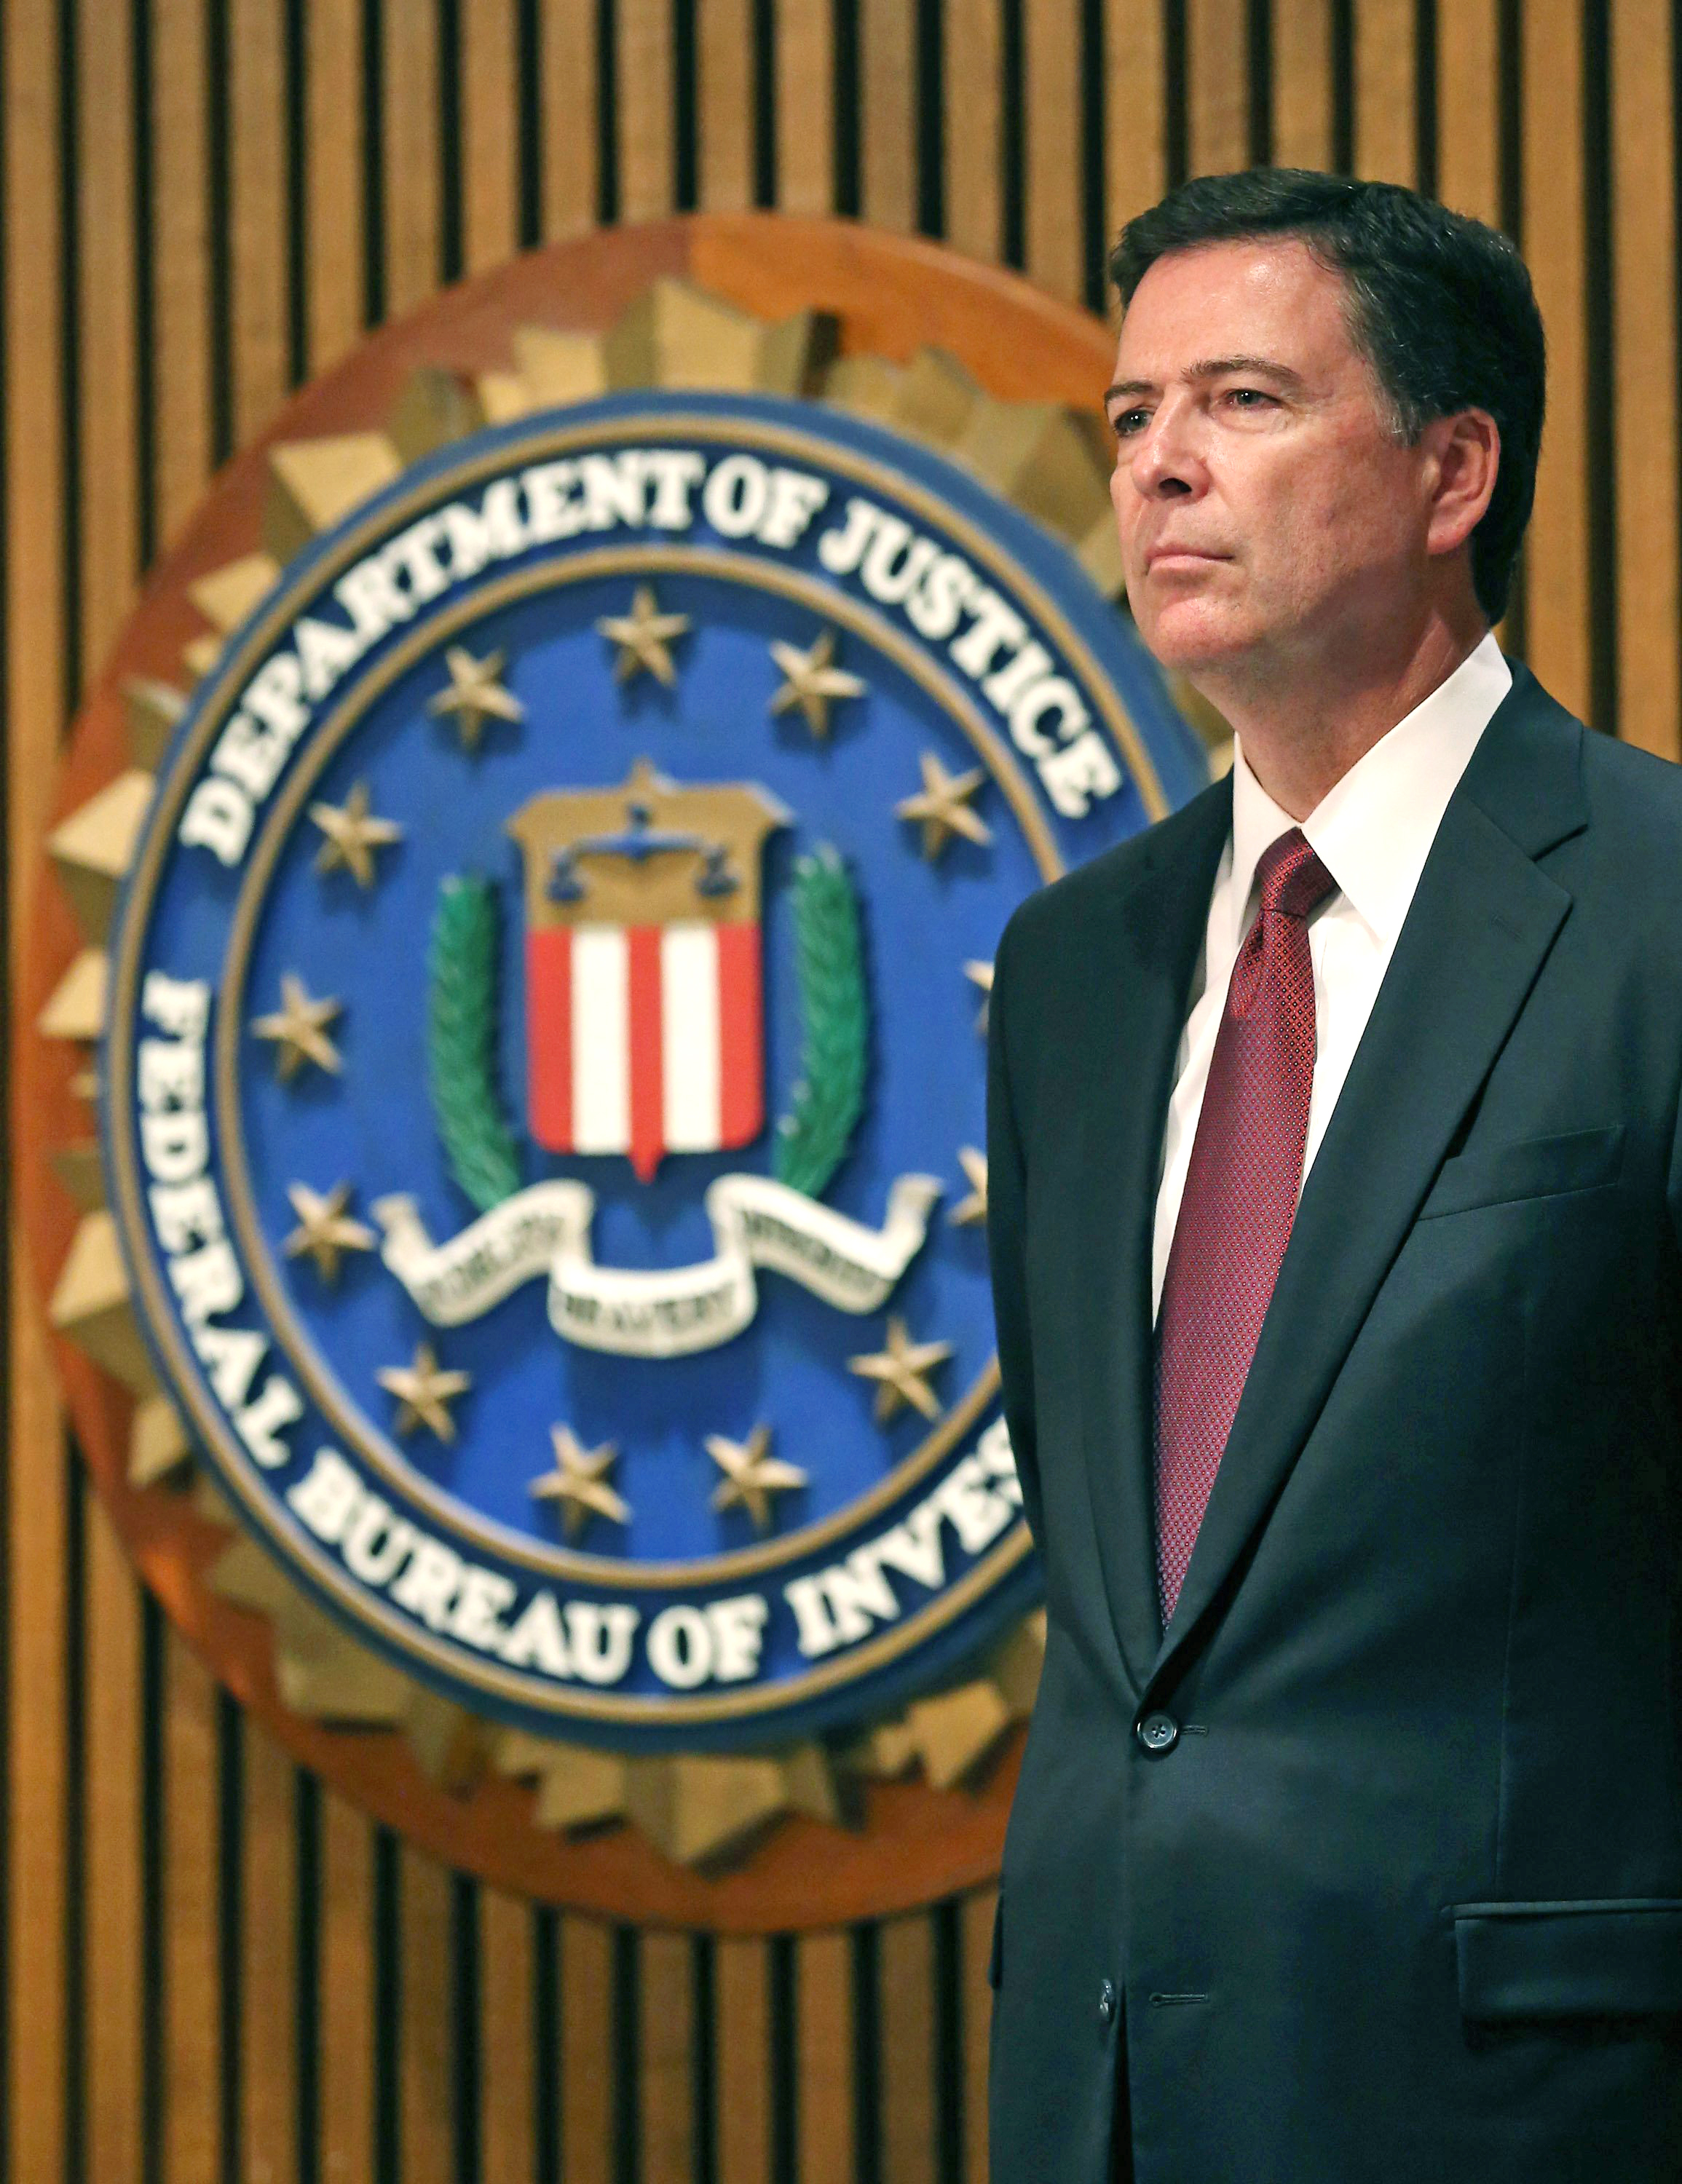 FBI Director James Comey participates in a news conference on child sex trafficking, at FBI headquarters, June 23, 2014 in Washington, D.C. (Mark Wilson—Getty Images)